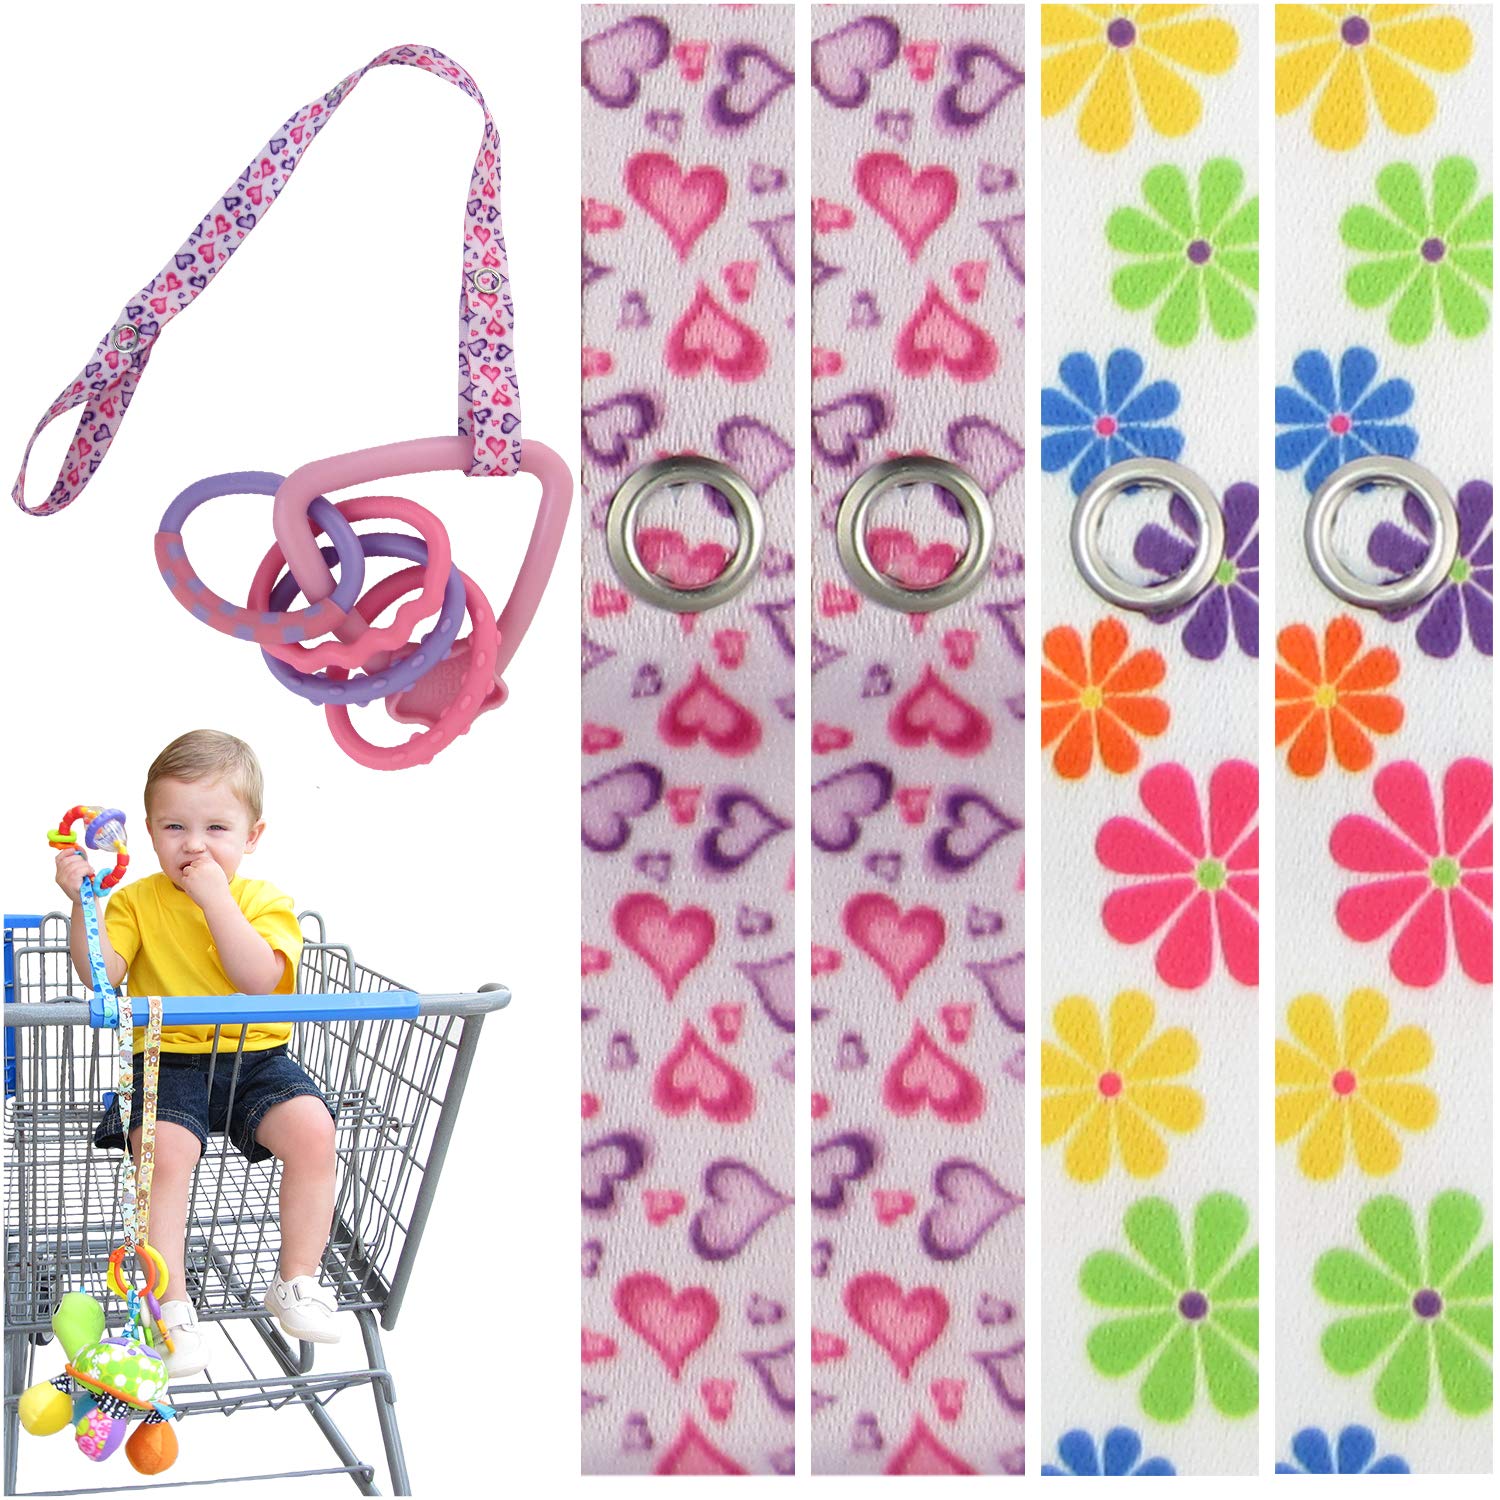 PBnJ baby Toy Saver Strap Holder Leash Secure Accessories FlowerHearts - 4pc